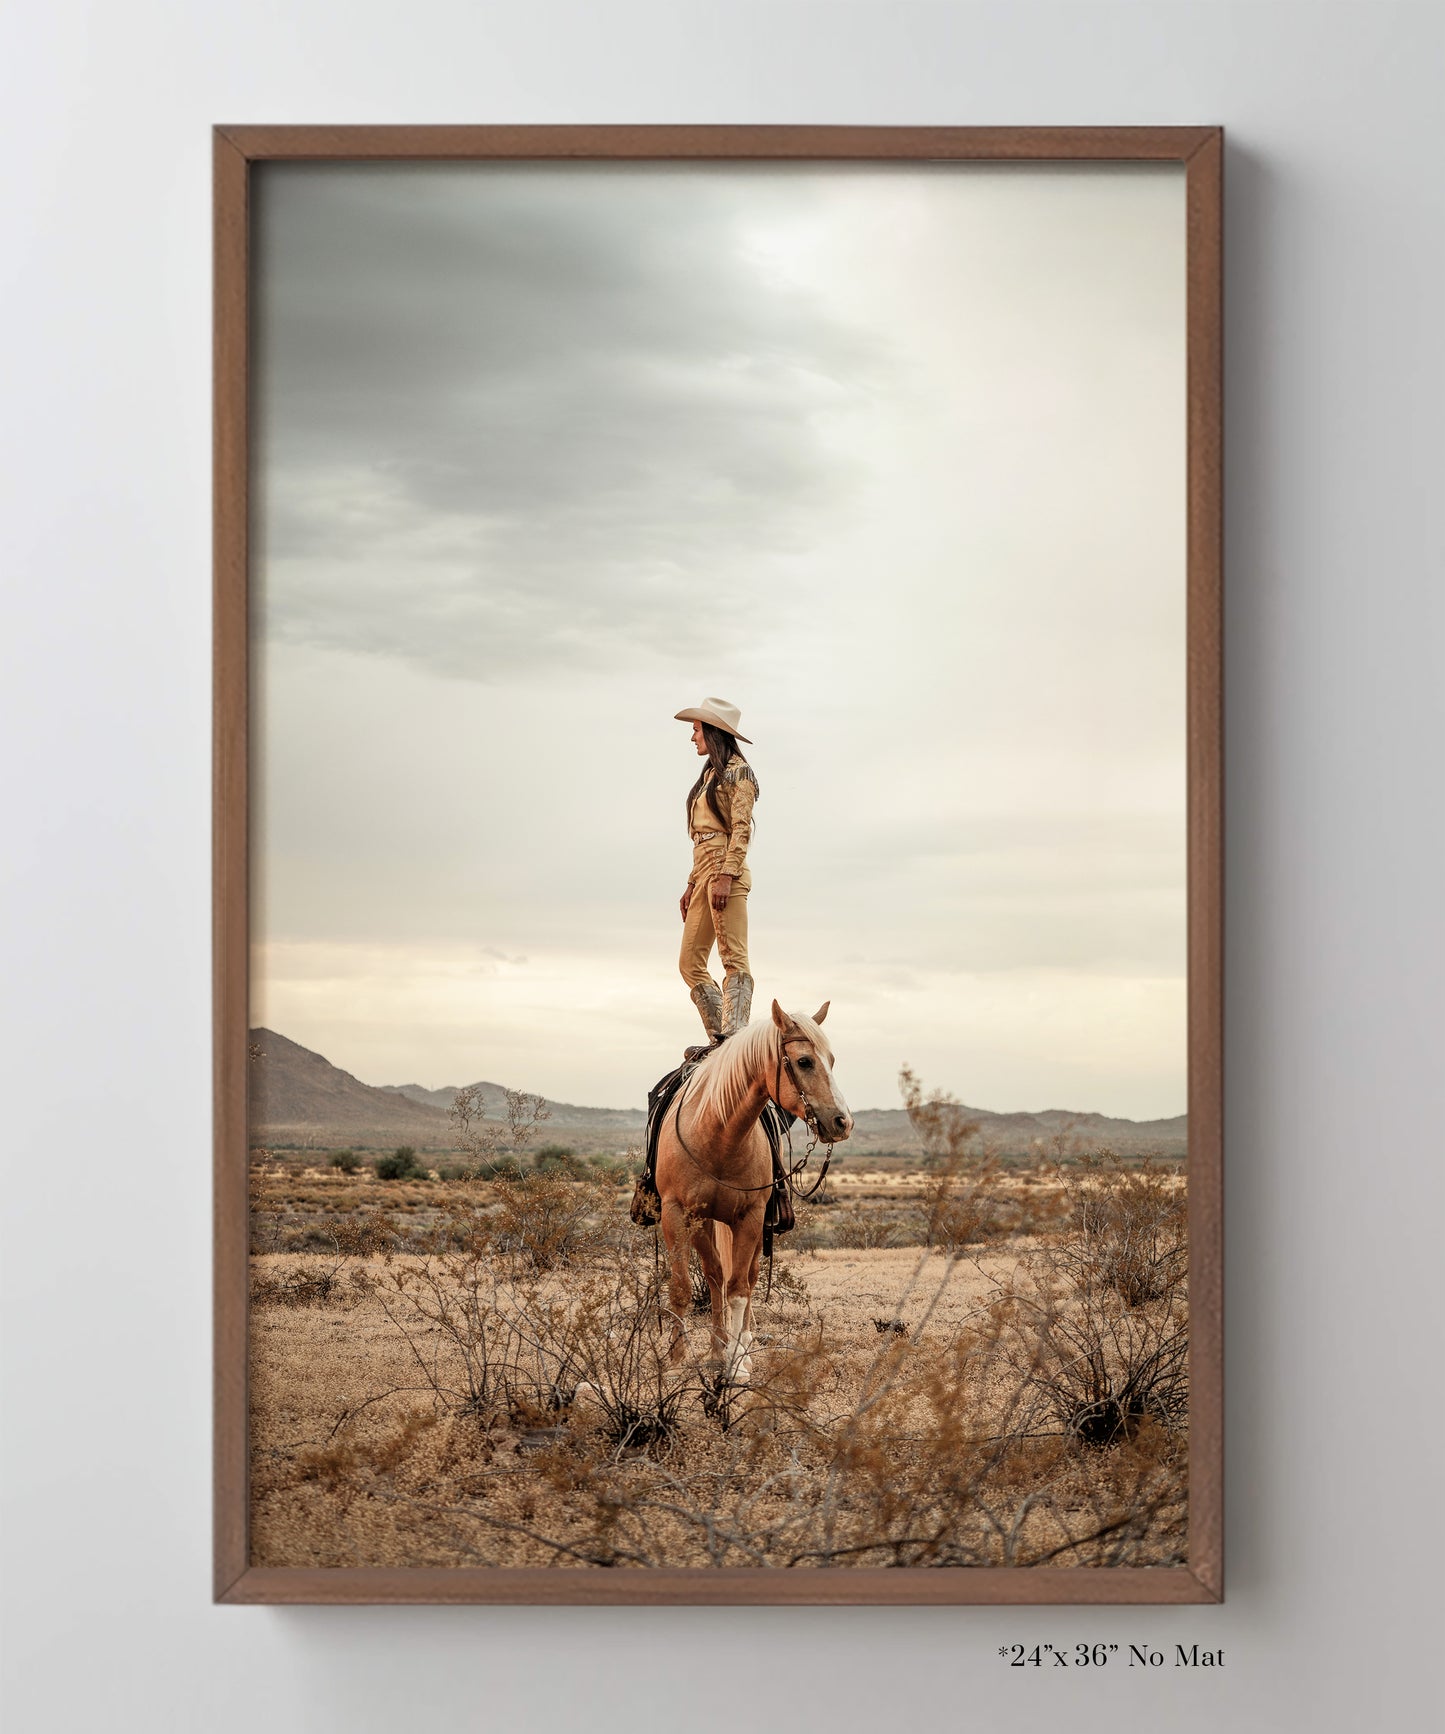 The Cowgirl Collection #19/20 by Ben Christensen